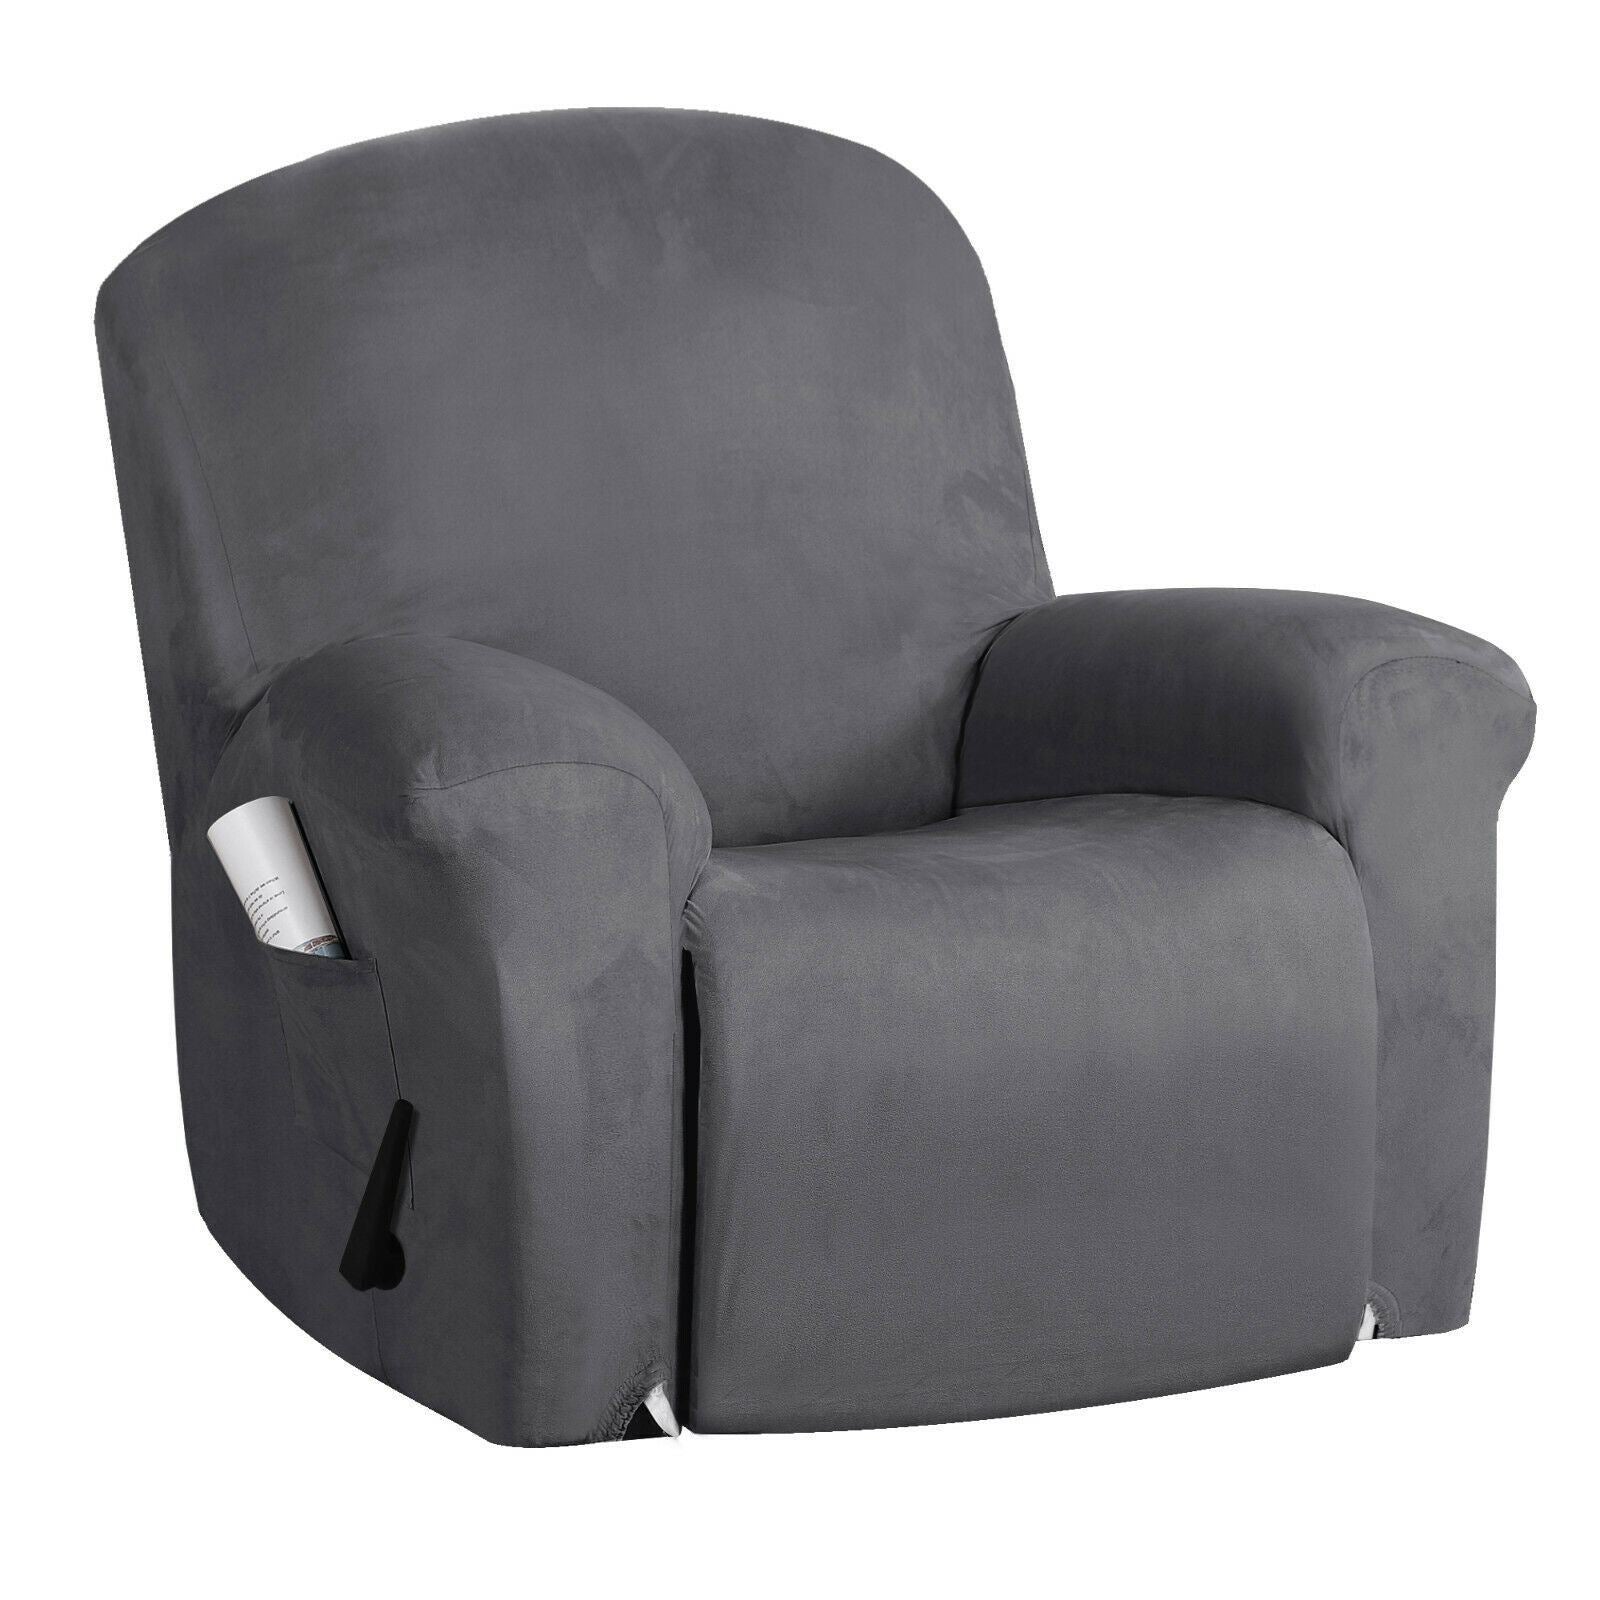 Suede Recliner Sofa Cover Non Slip Stretch Recliner Chair Slip Cover